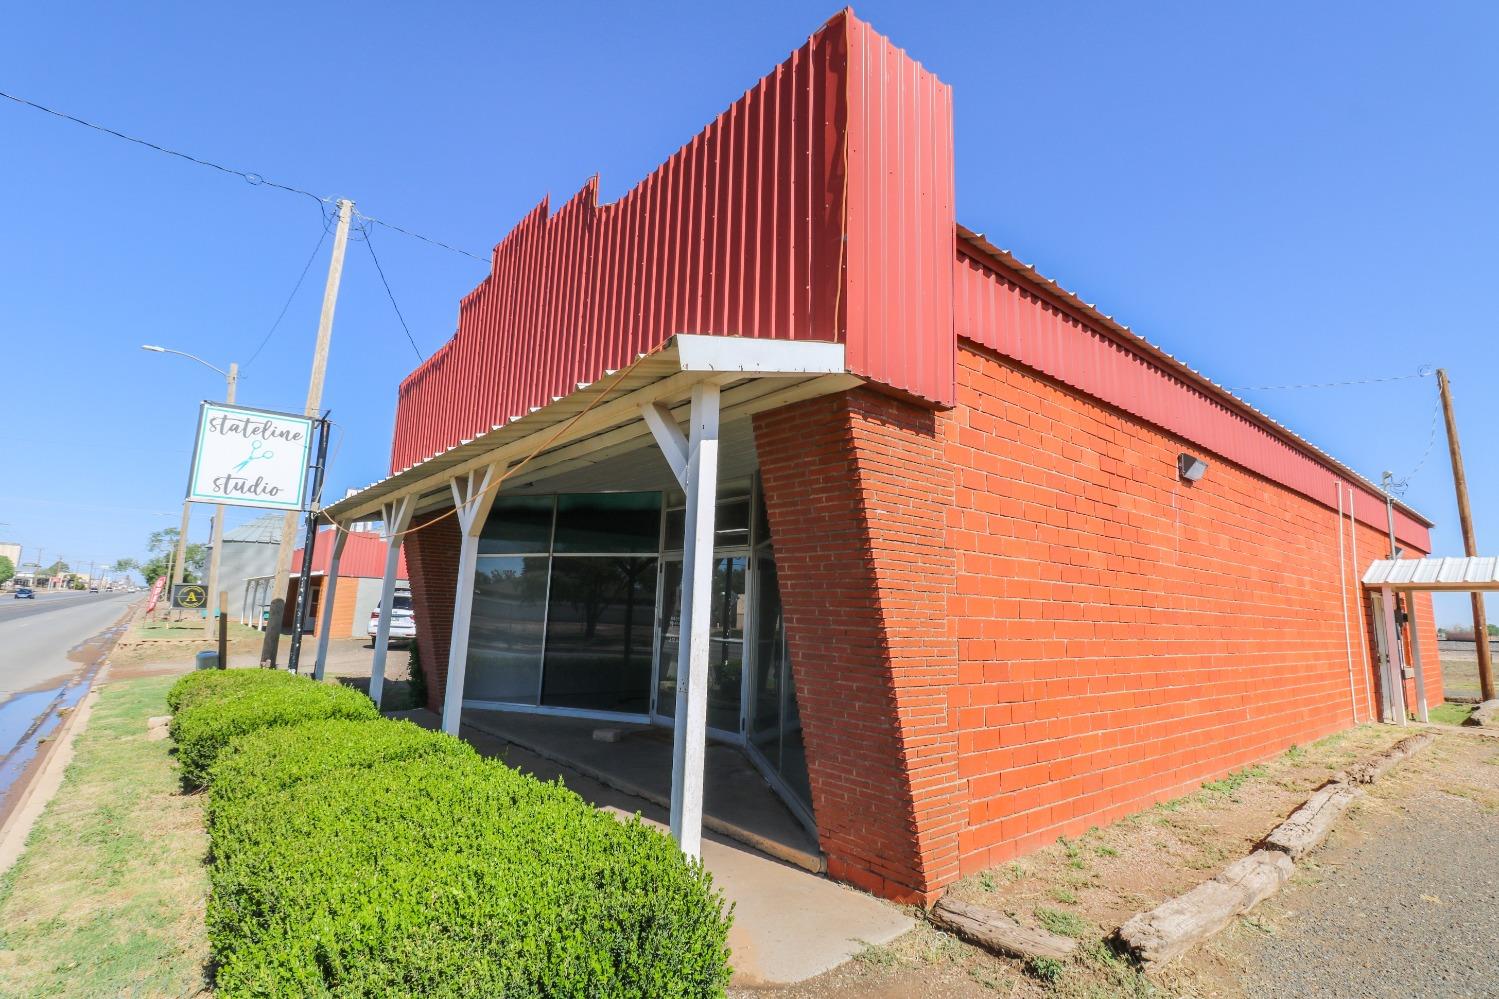 This single tenant retail building has endless potential and is ready for its next owner! This space is very open which could allow it to be anything from a salon, boutique, to an office, the possibilities are endless! The 1,200 square foot building is located directly on US Highway 84 which offers great advertising opportunities. The building has epoxy flooring, a metal pitched roof, and newly updated central ac/heating. Call us today for a private showing.